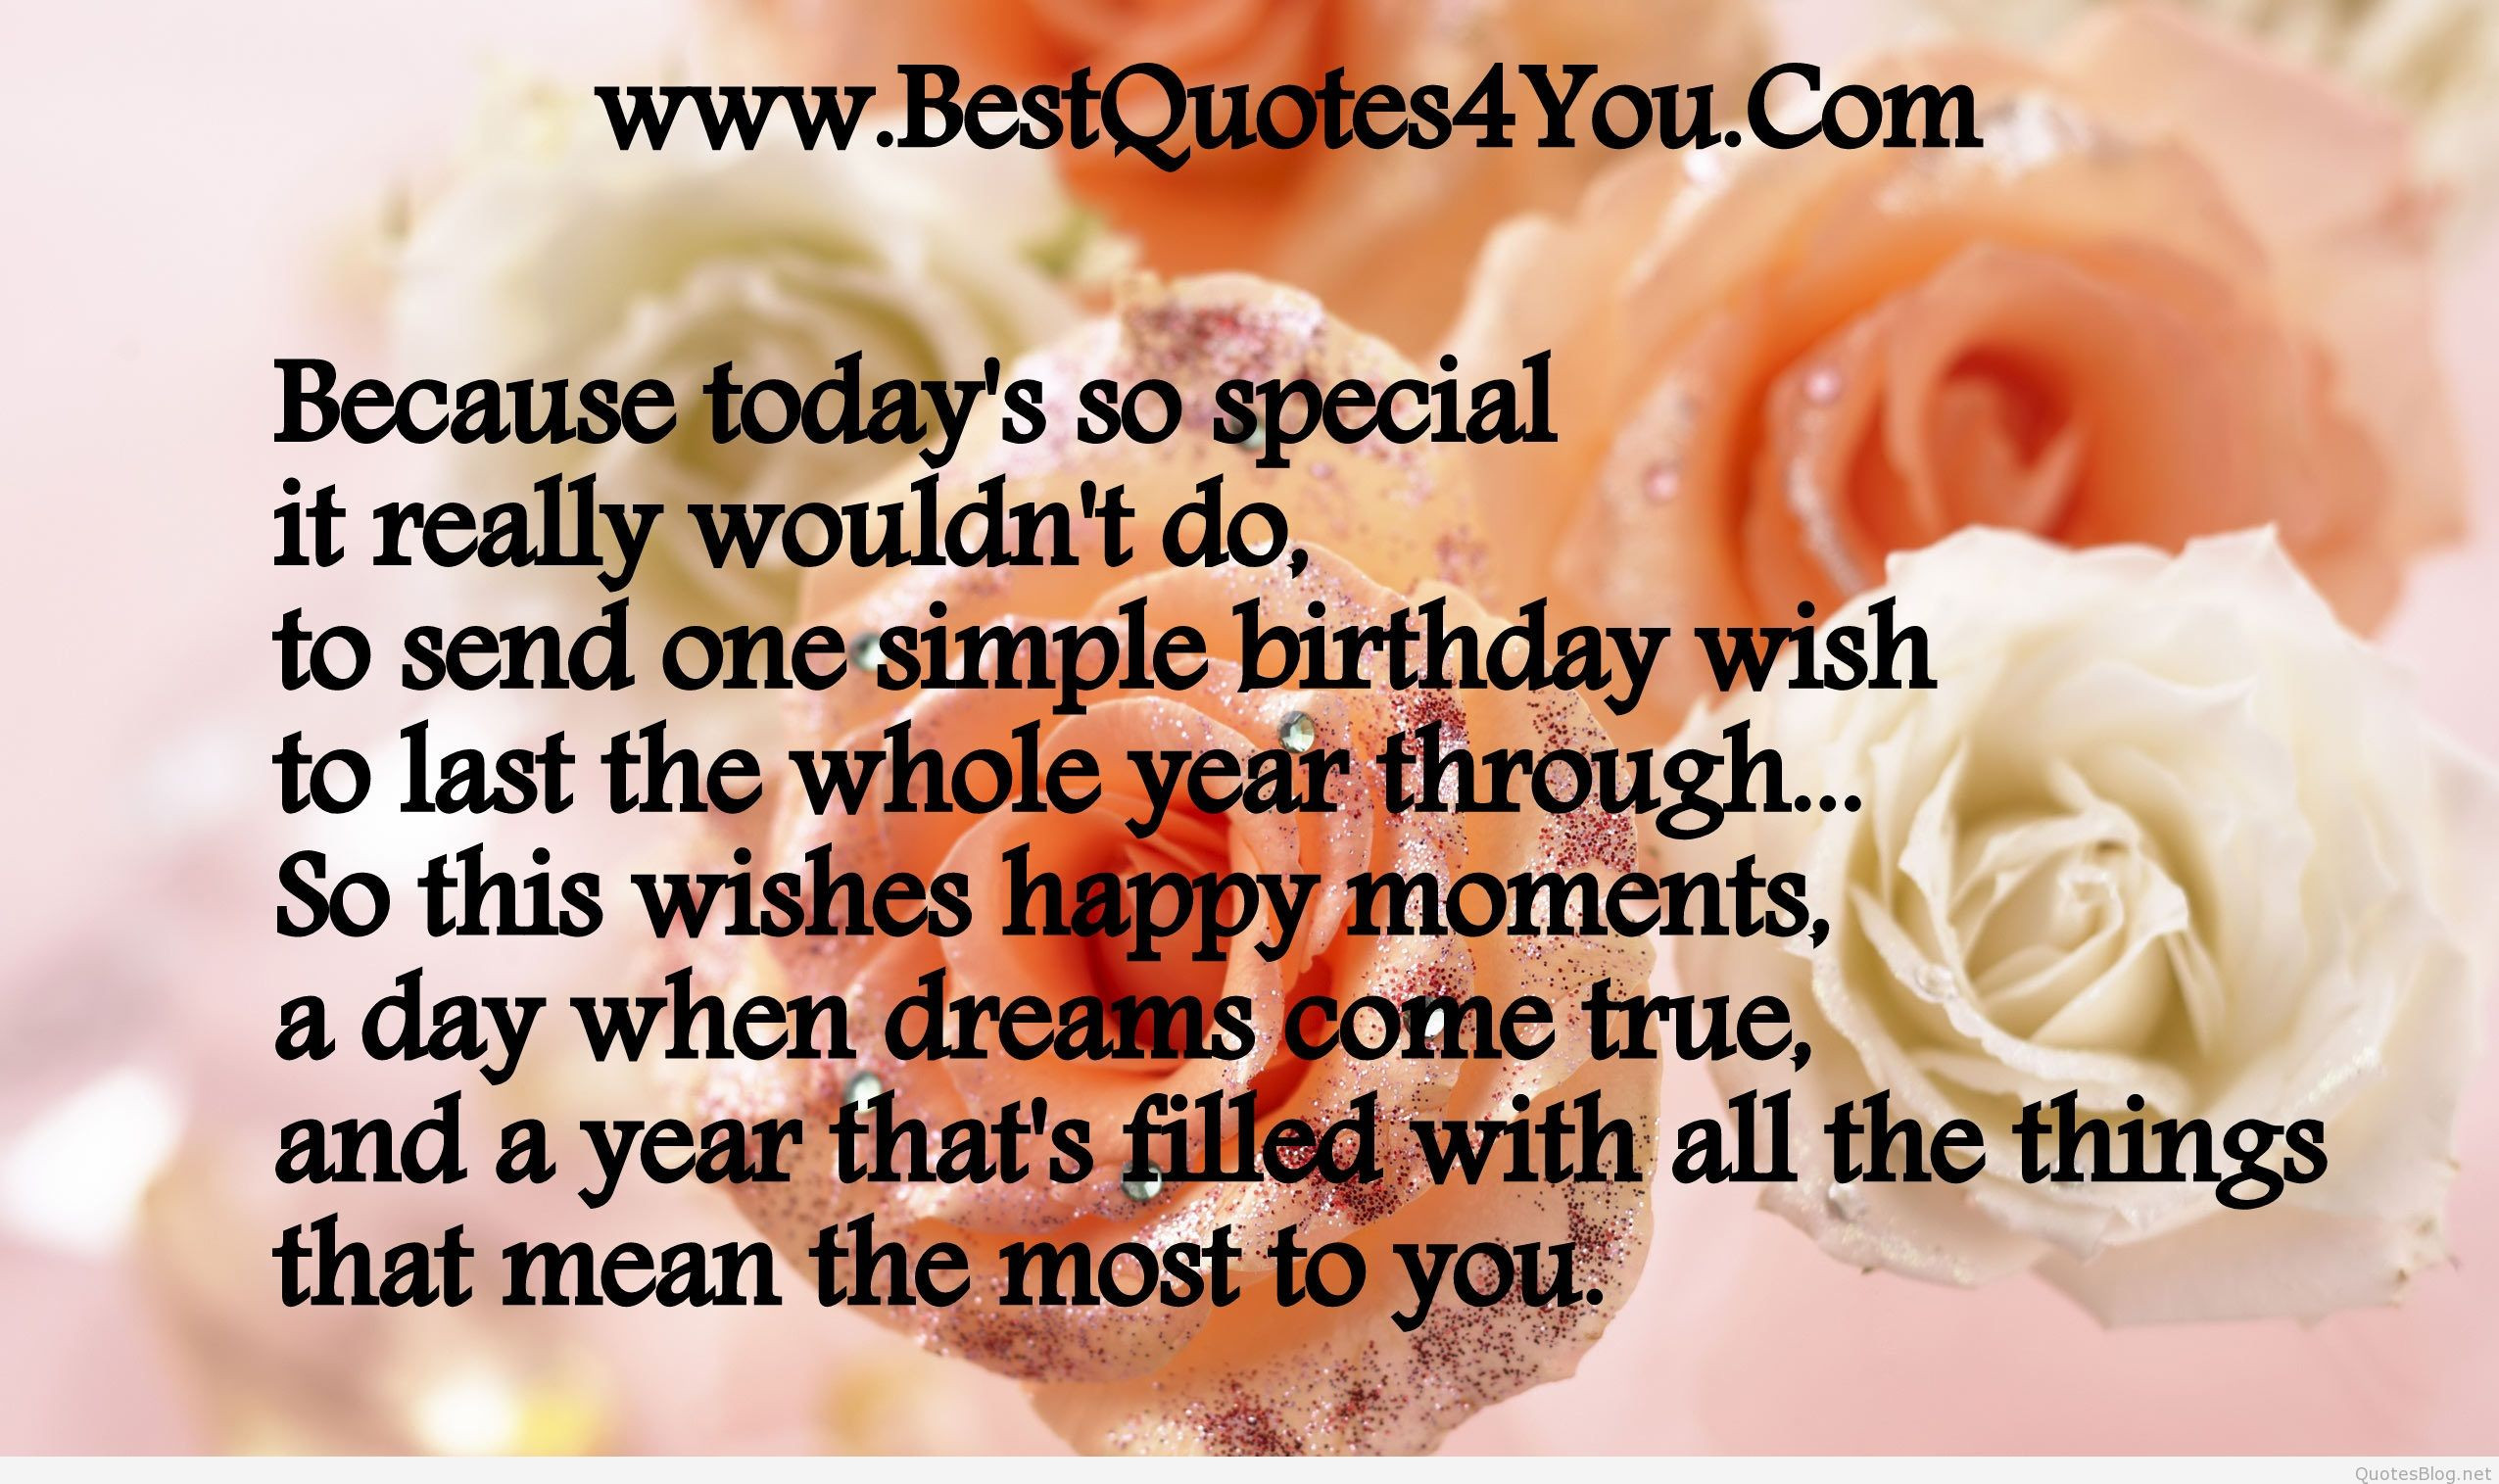 Quote For A Birthday
 Happy birthday quotes 2015 images